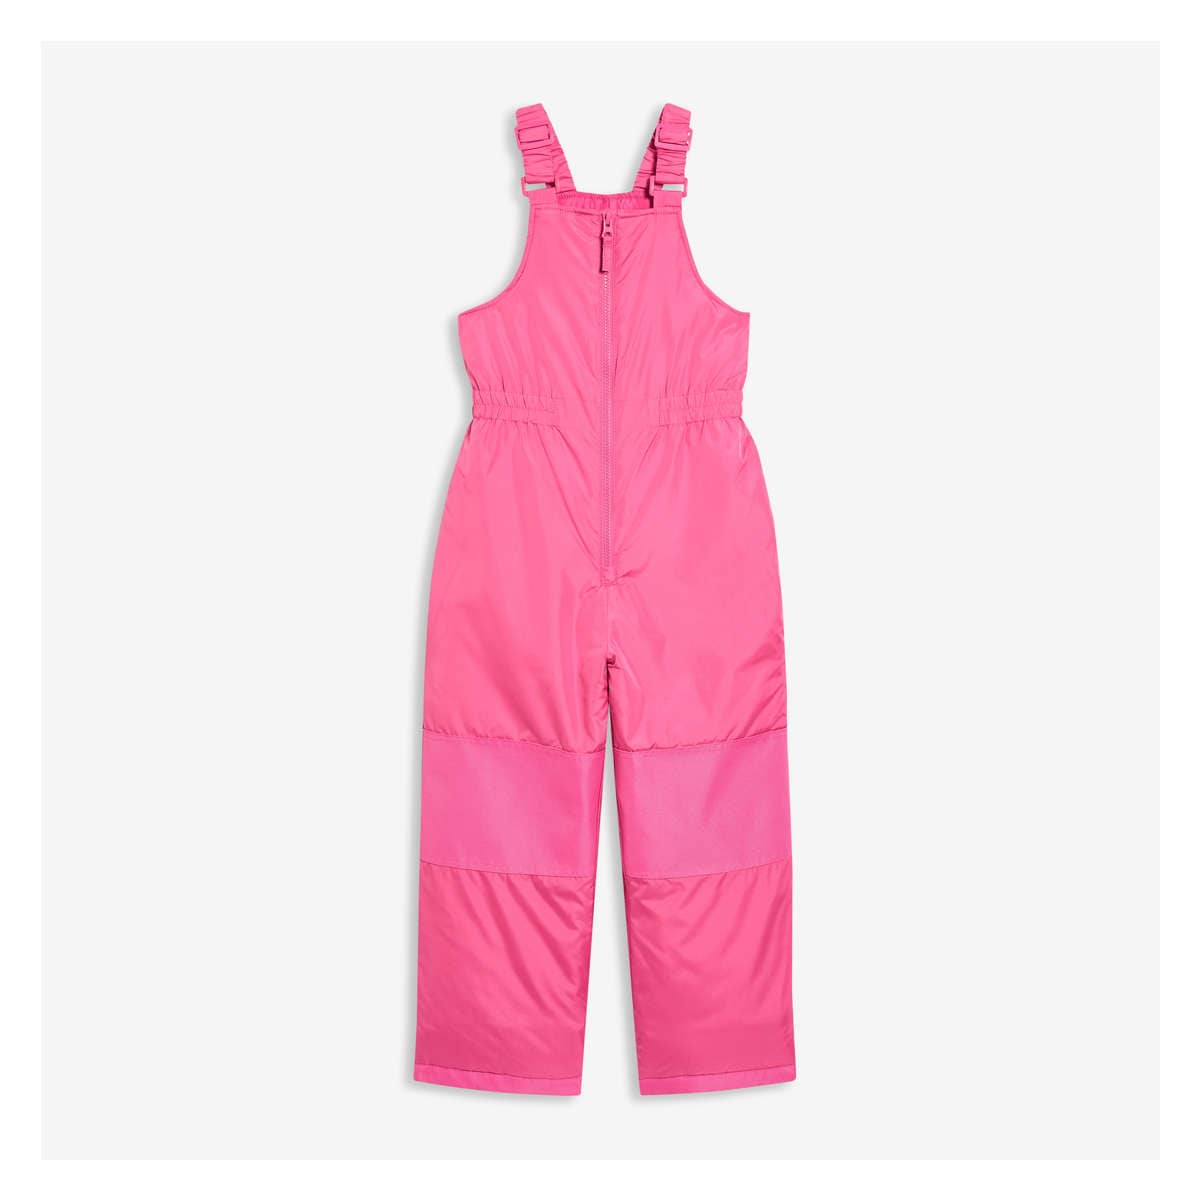 Kid Girls' Bib Snow Pant with PrimaLoft® in Light Neon Pink from